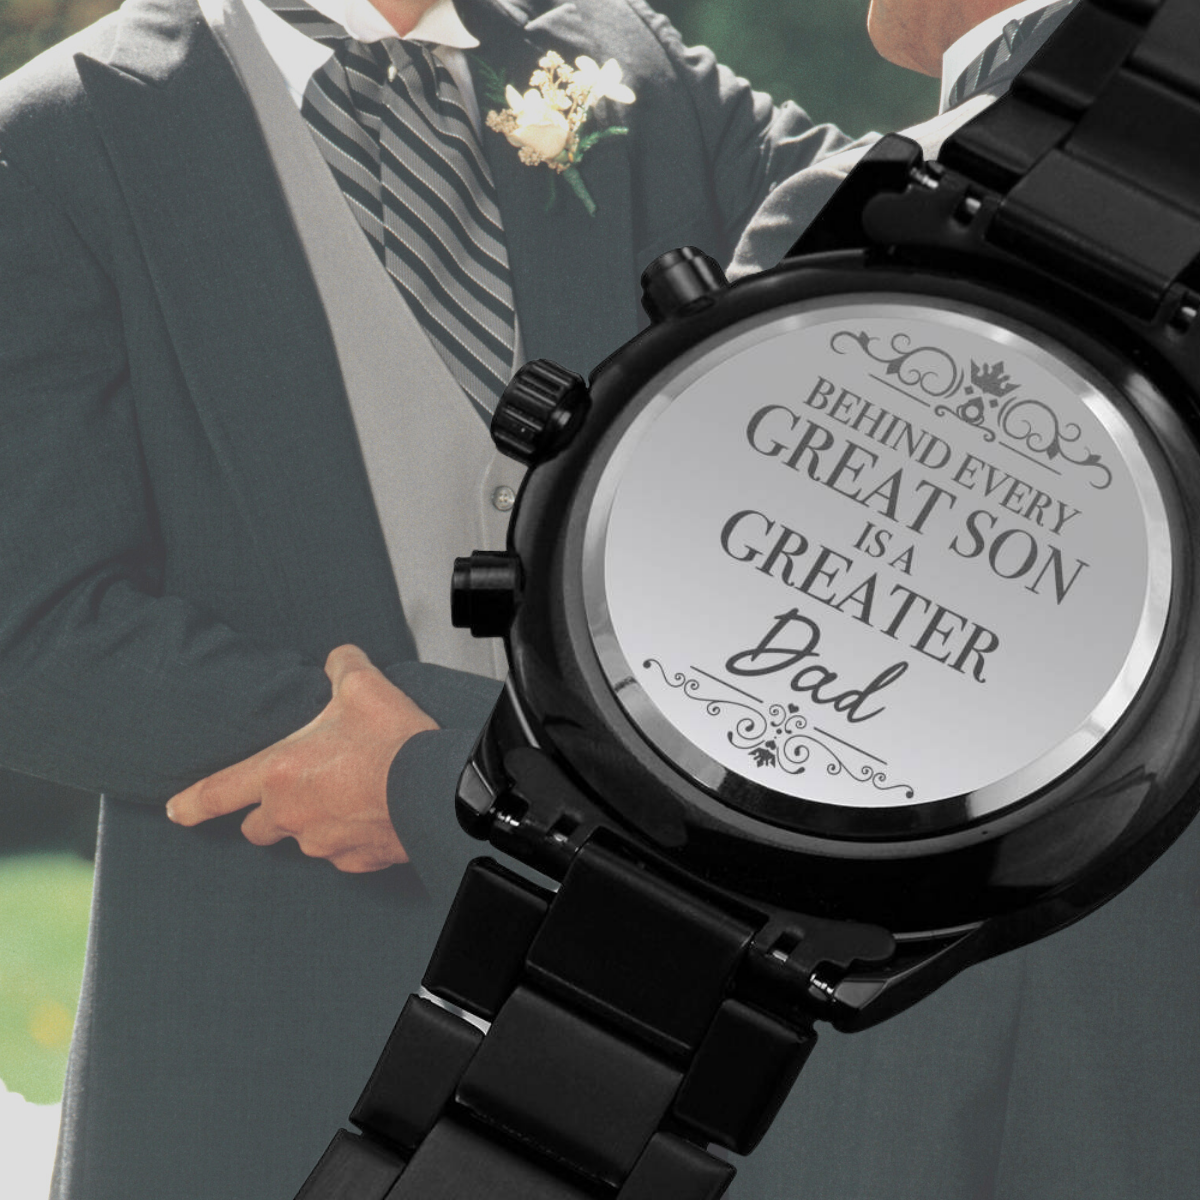 Father of the Groom Engraved Behind Every Great Son is a Greater Dad Black Chronograph Watch